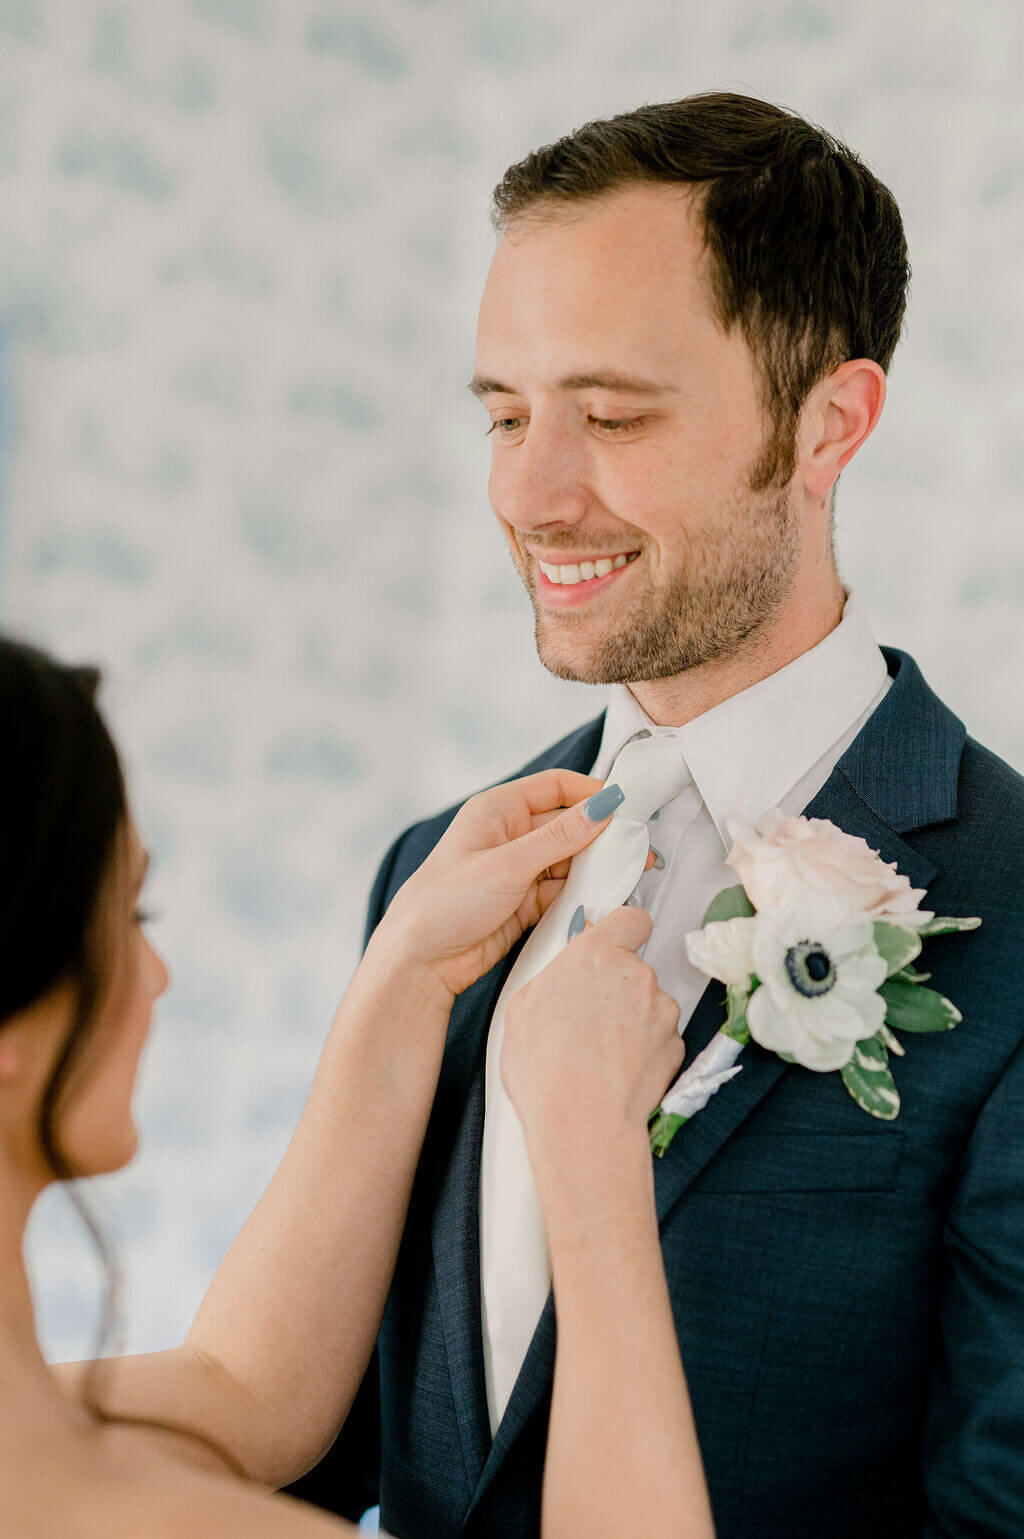 bride fixing grooms tie for getting ready photos together